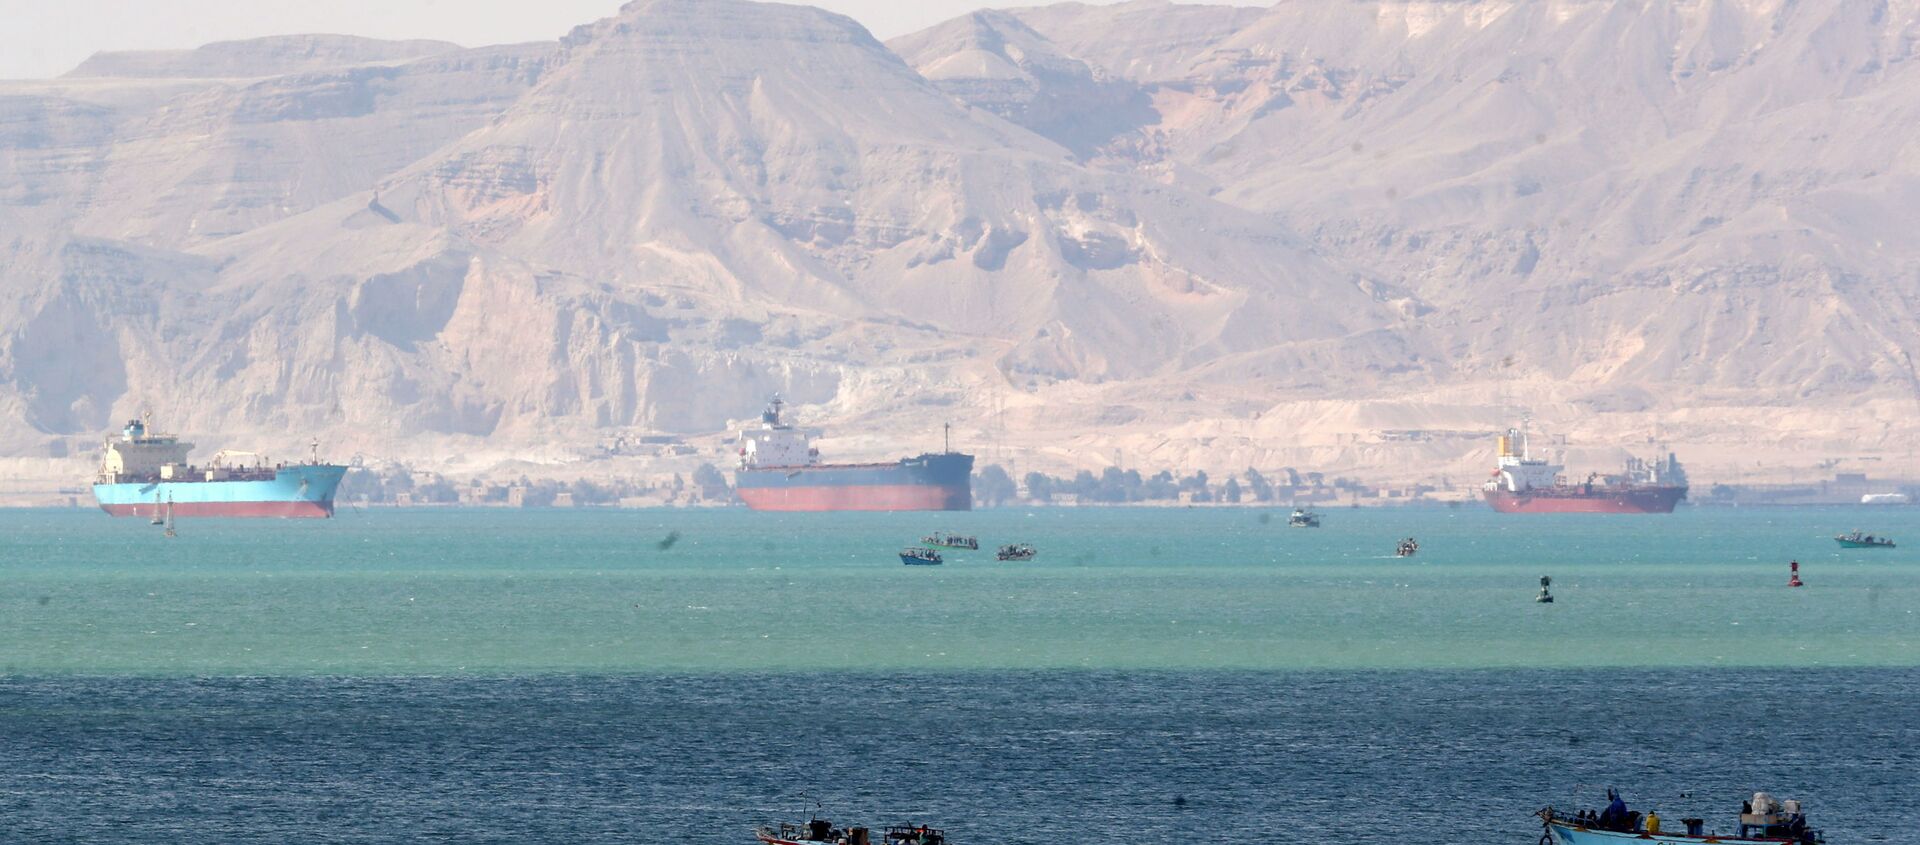 Ships and boats are seen at the entrance of Suez Canal, which was blocked by stranded container ship Ever Given that ran aground, Egypt March 28, 2021. REUTERS/Mohamed Abd El Ghany - Sputnik International, 1920, 30.03.2021